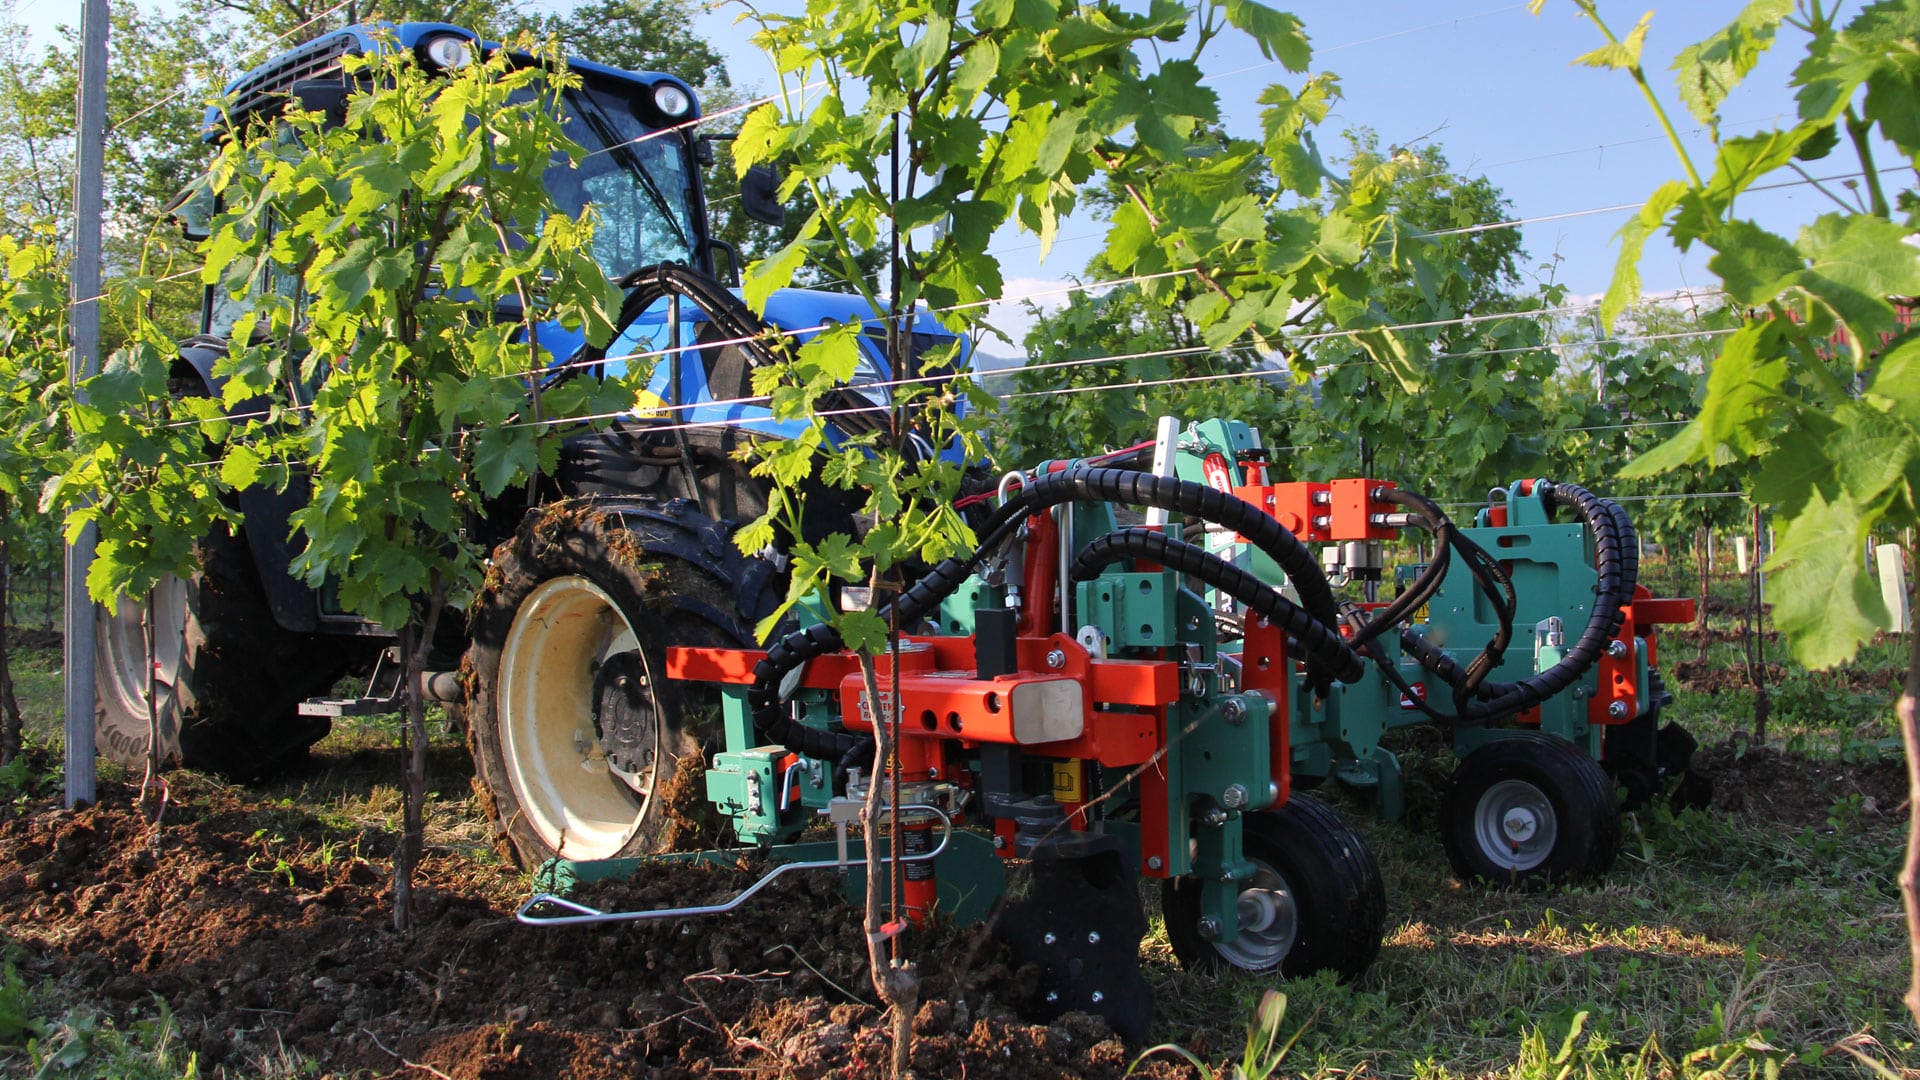 CLEMENS Technologies - Viticulture and fruit technology